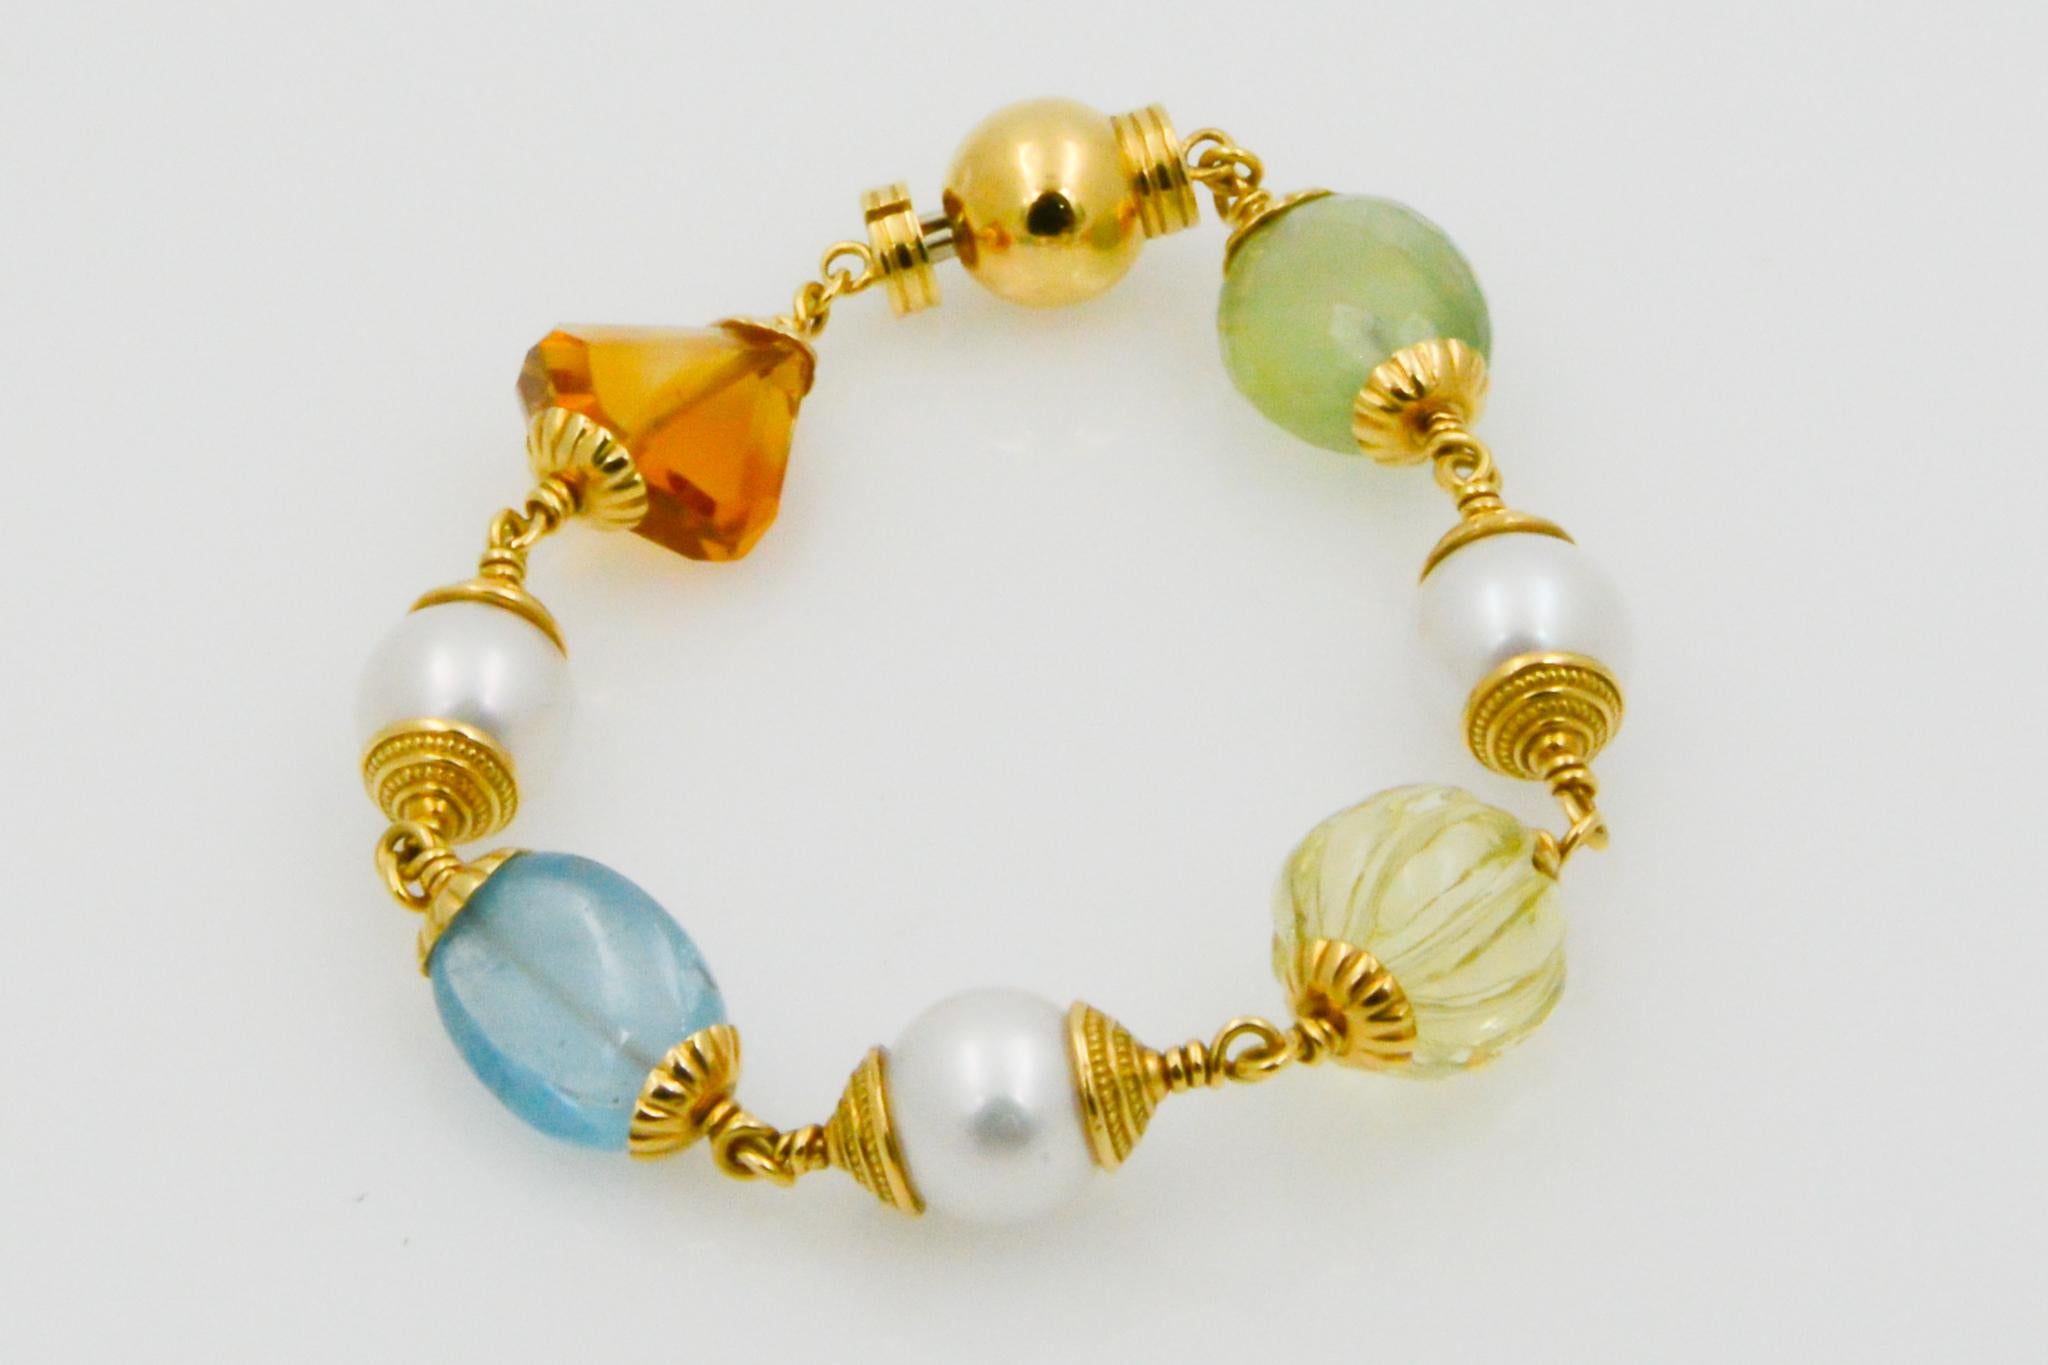 From Seaman Schepps, this 18k yellow gold Baroque bracelet features multi-stones including citrine (8.80cts), blue topaz(10.5cts), round lemon citrine(12.75cts), prehnite(12.67ct) and three freshwater pearl accents. The bracelet is signed Seaman